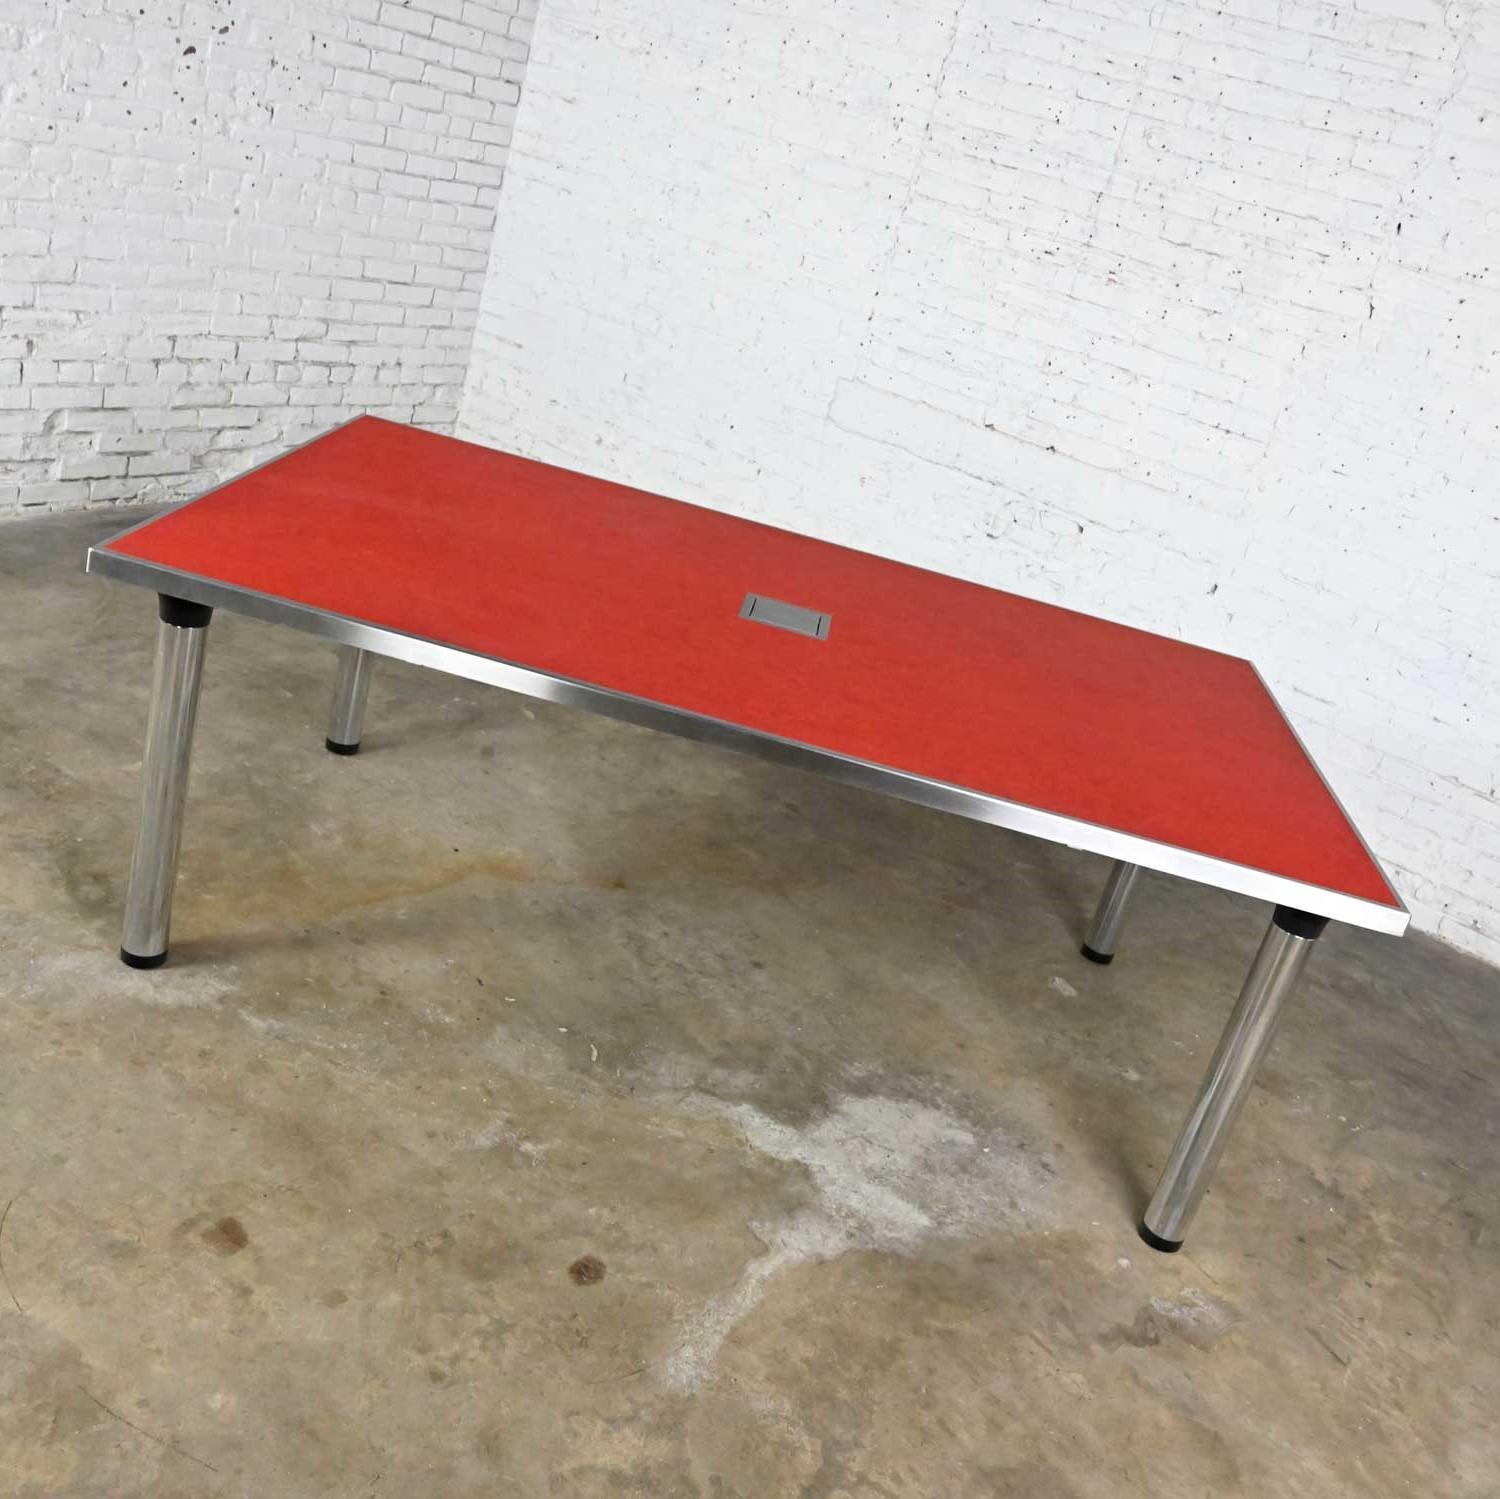 Stunning vintage modern red Marmoleum topped & chrome edged & legged custom-made work or dining table with black accents and center power box with cords. Beautiful condition, keeping in mind that this is vintage and not new so will have signs of use